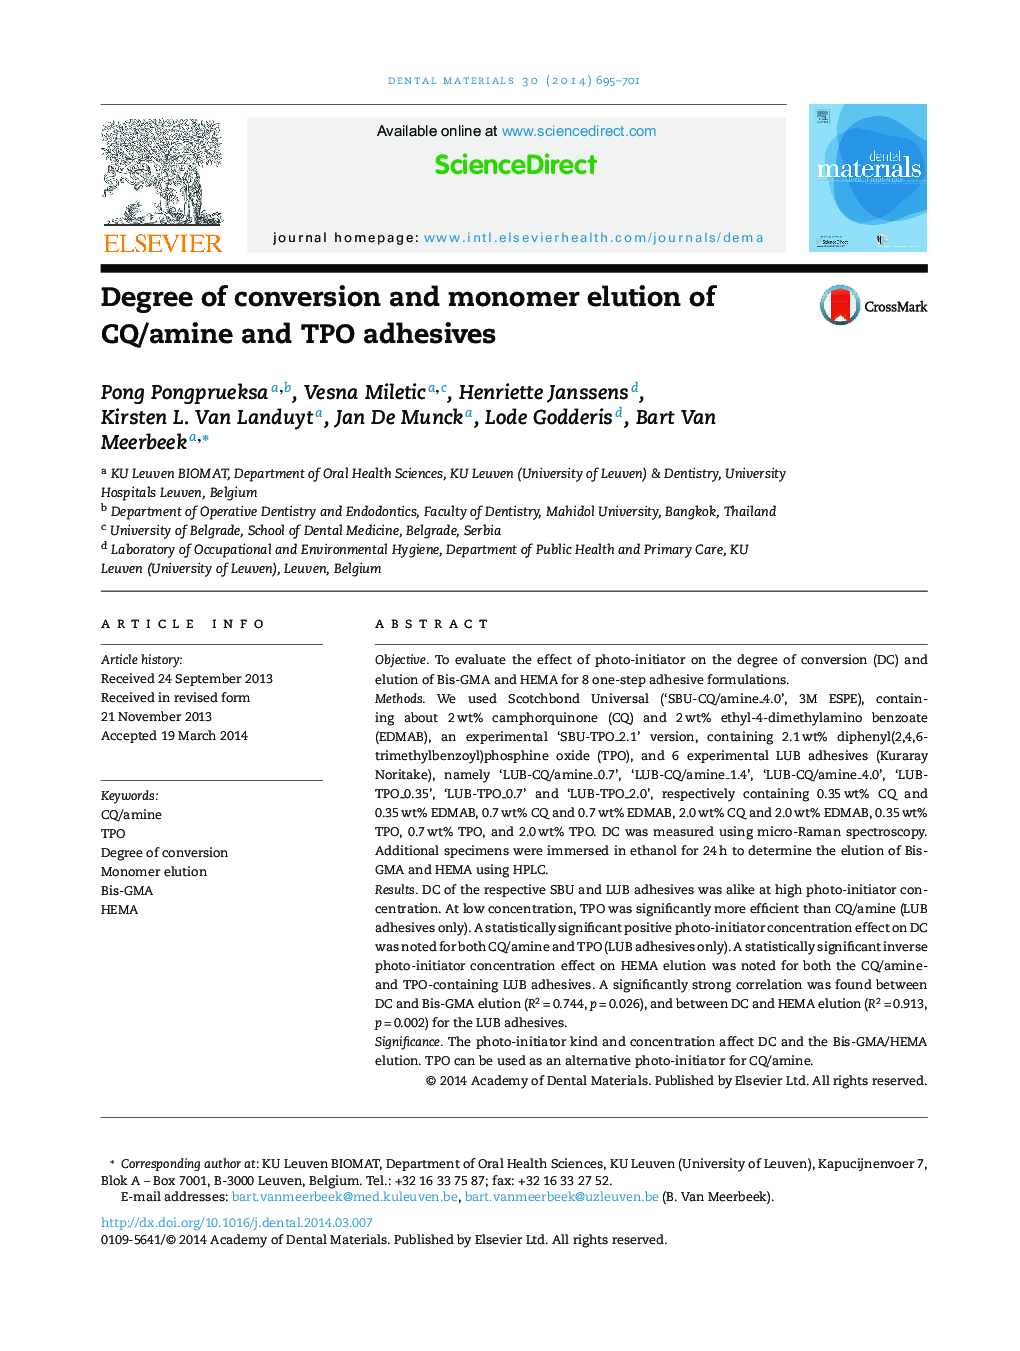 Degree of conversion and monomer elution of CQ/amine and TPO adhesives